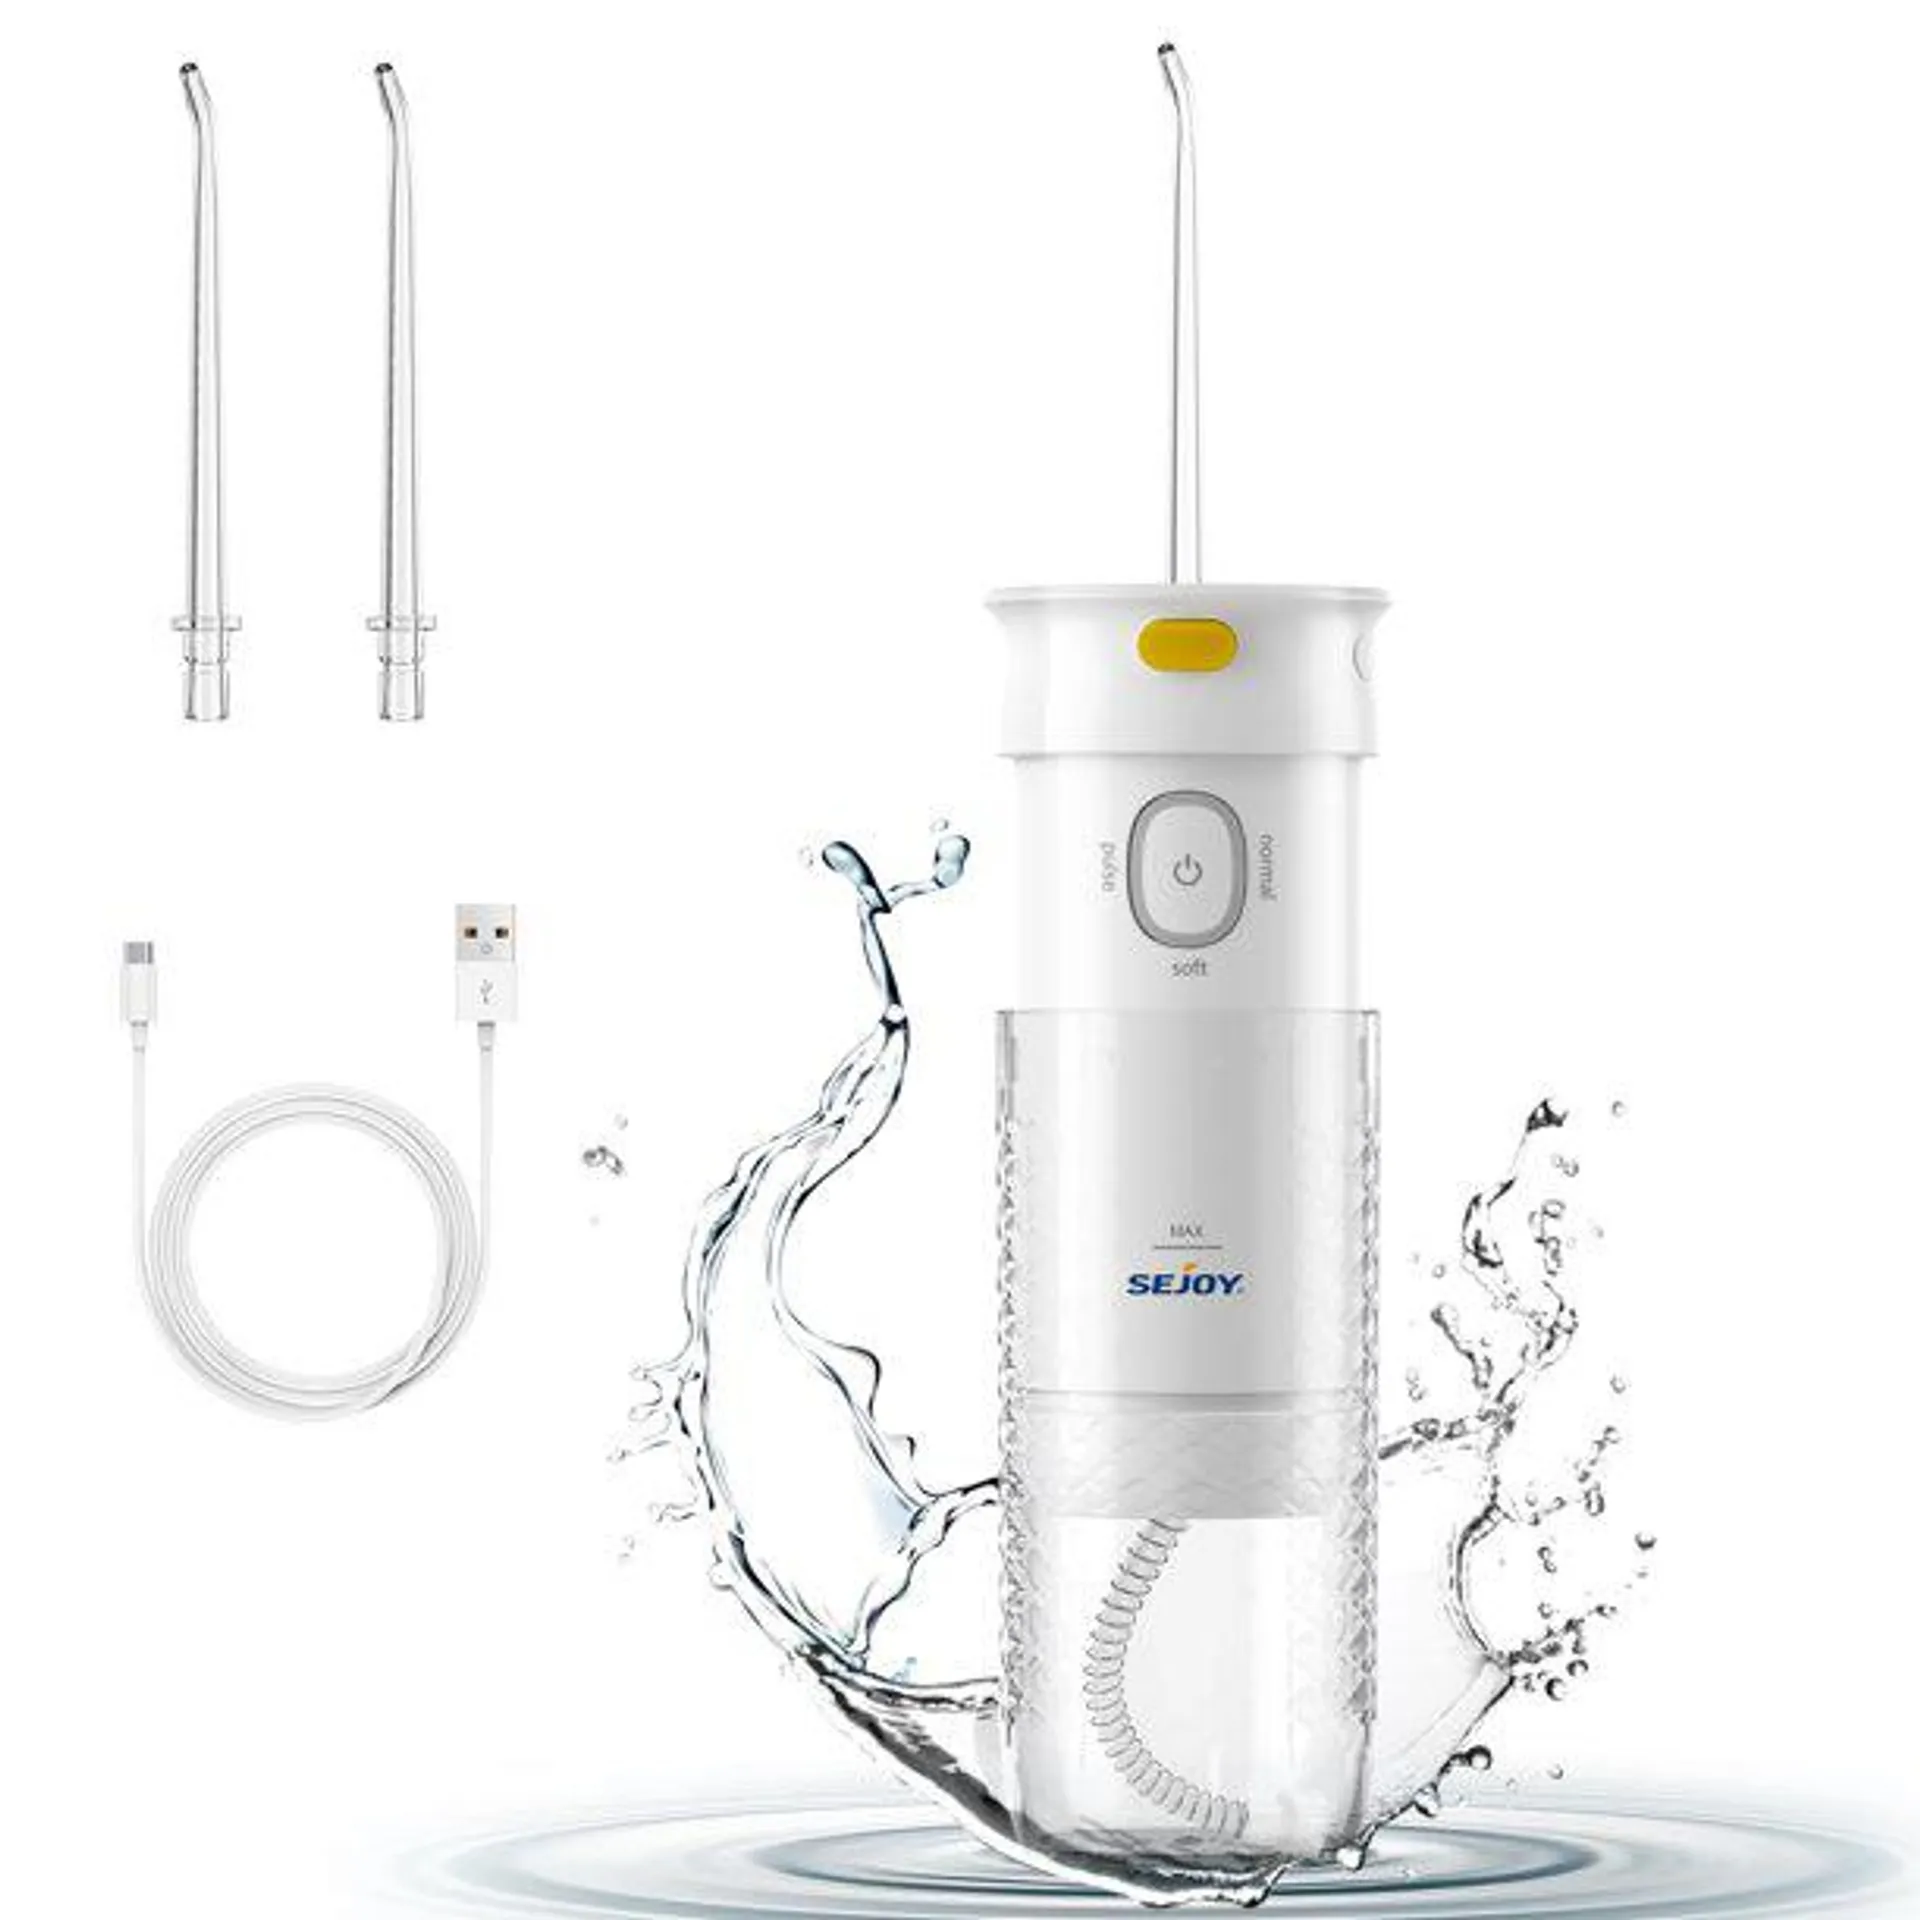 Sejoy Water Flosser Cordless Portable Water Pick for Teeth Cleaning, Telescopic Water Tank for Braces Care Travel and Home Use